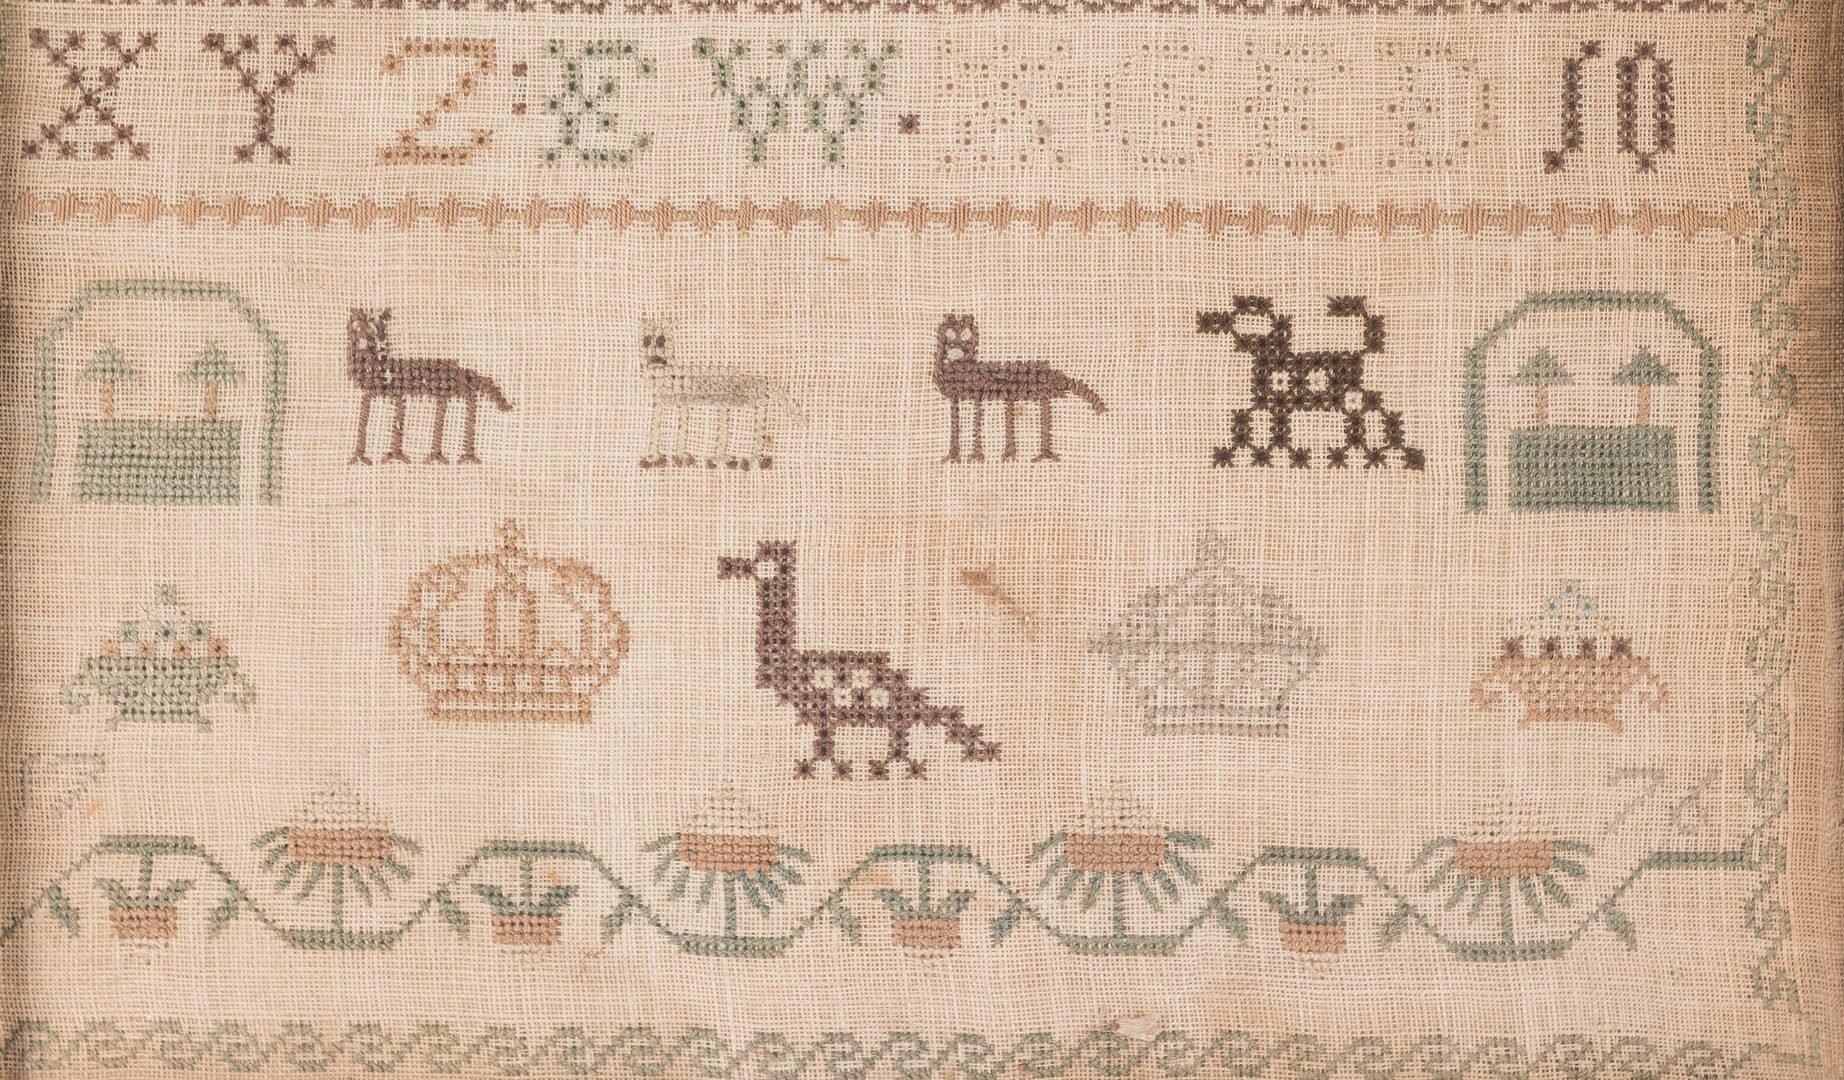 Lot 643: 3 English Samplers, 18th/19th Cent.